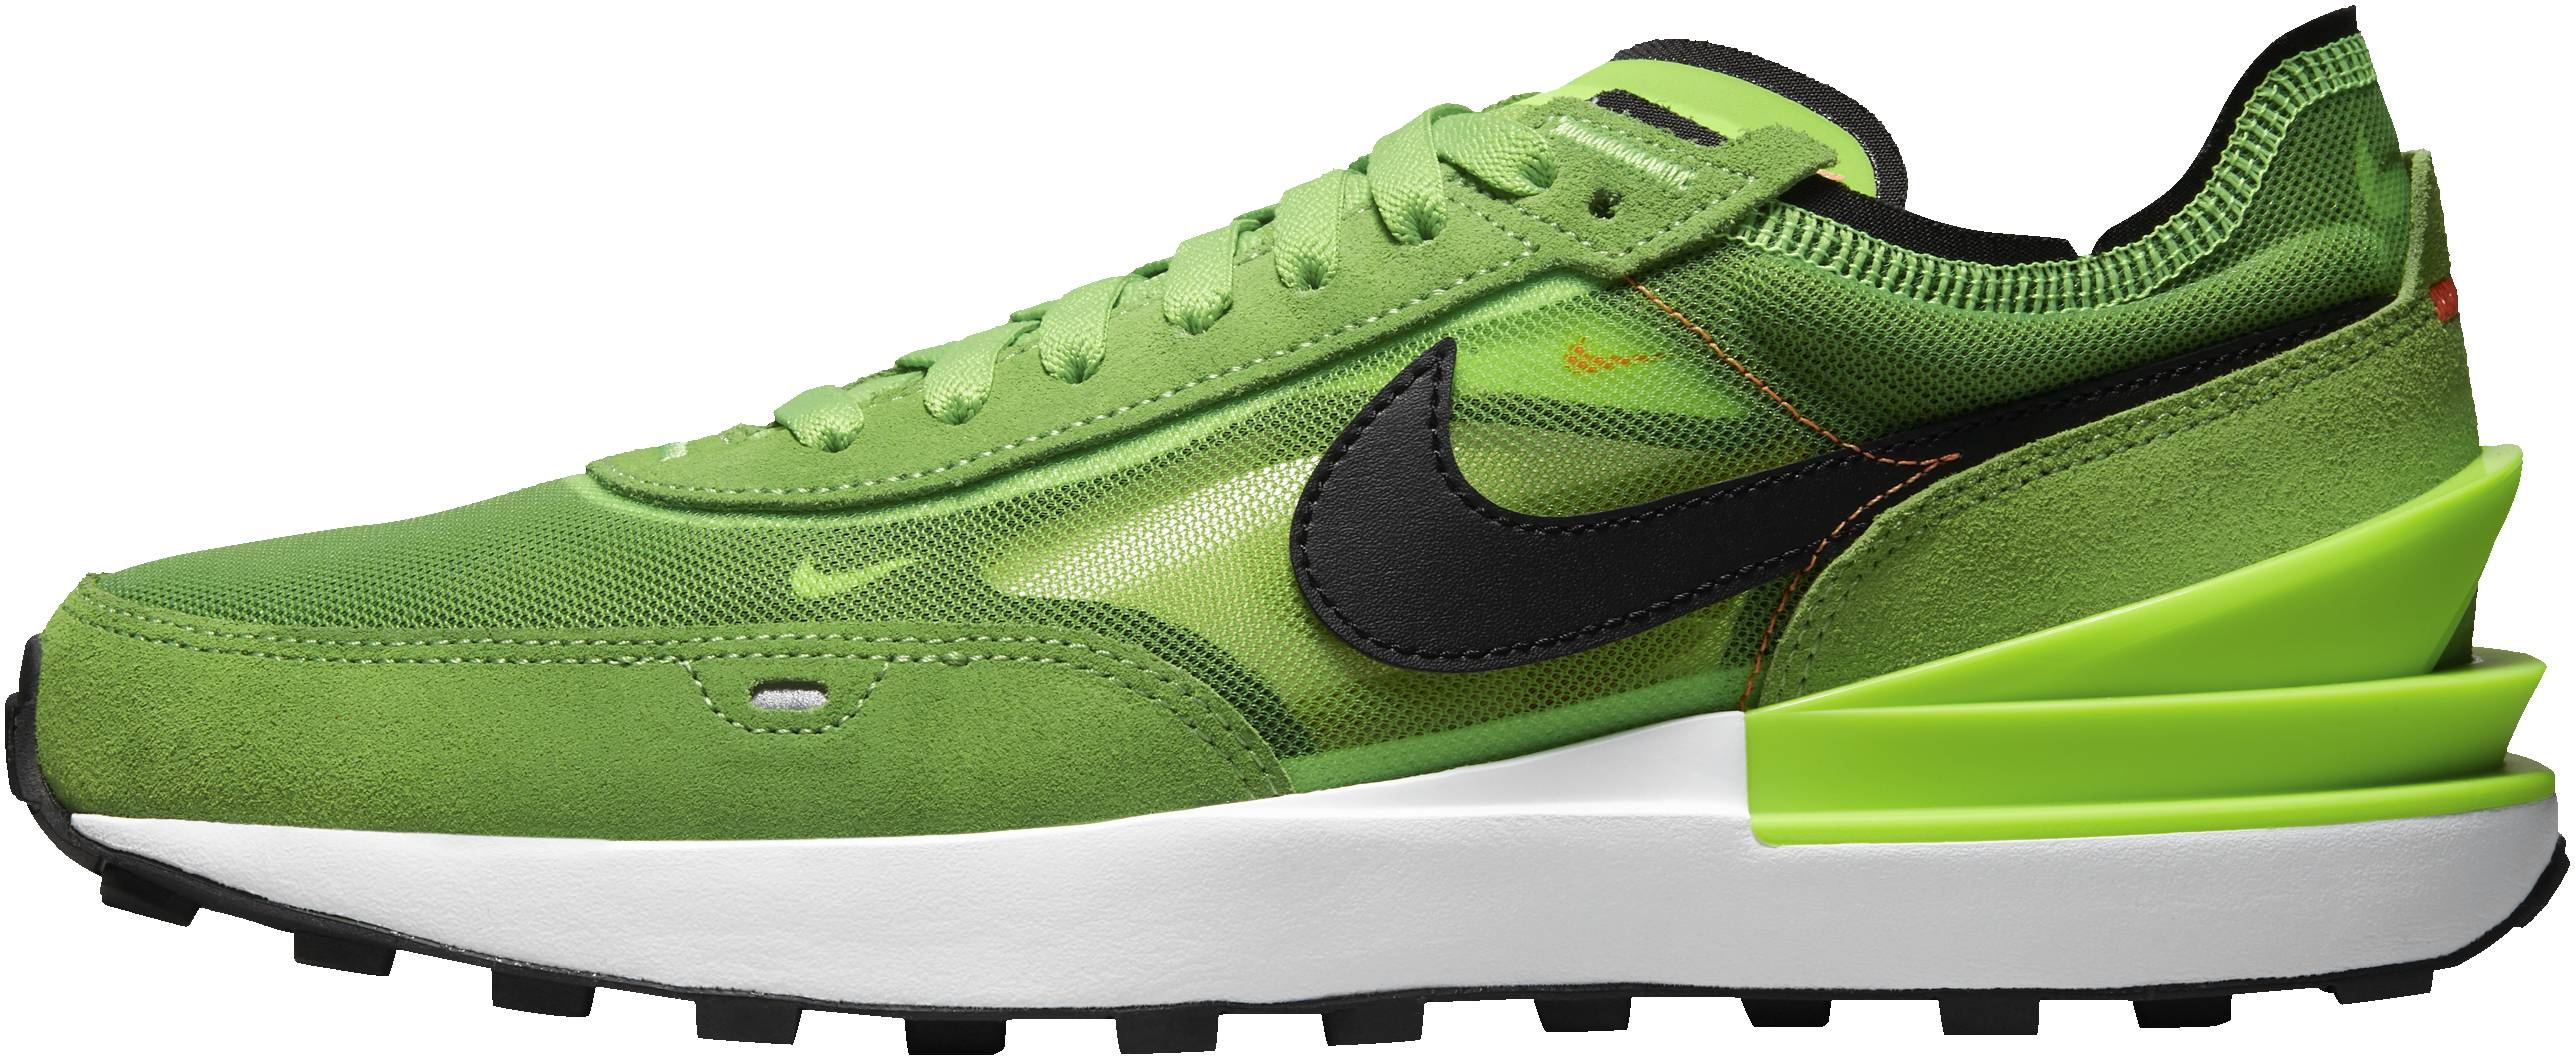 nike lime green shoes